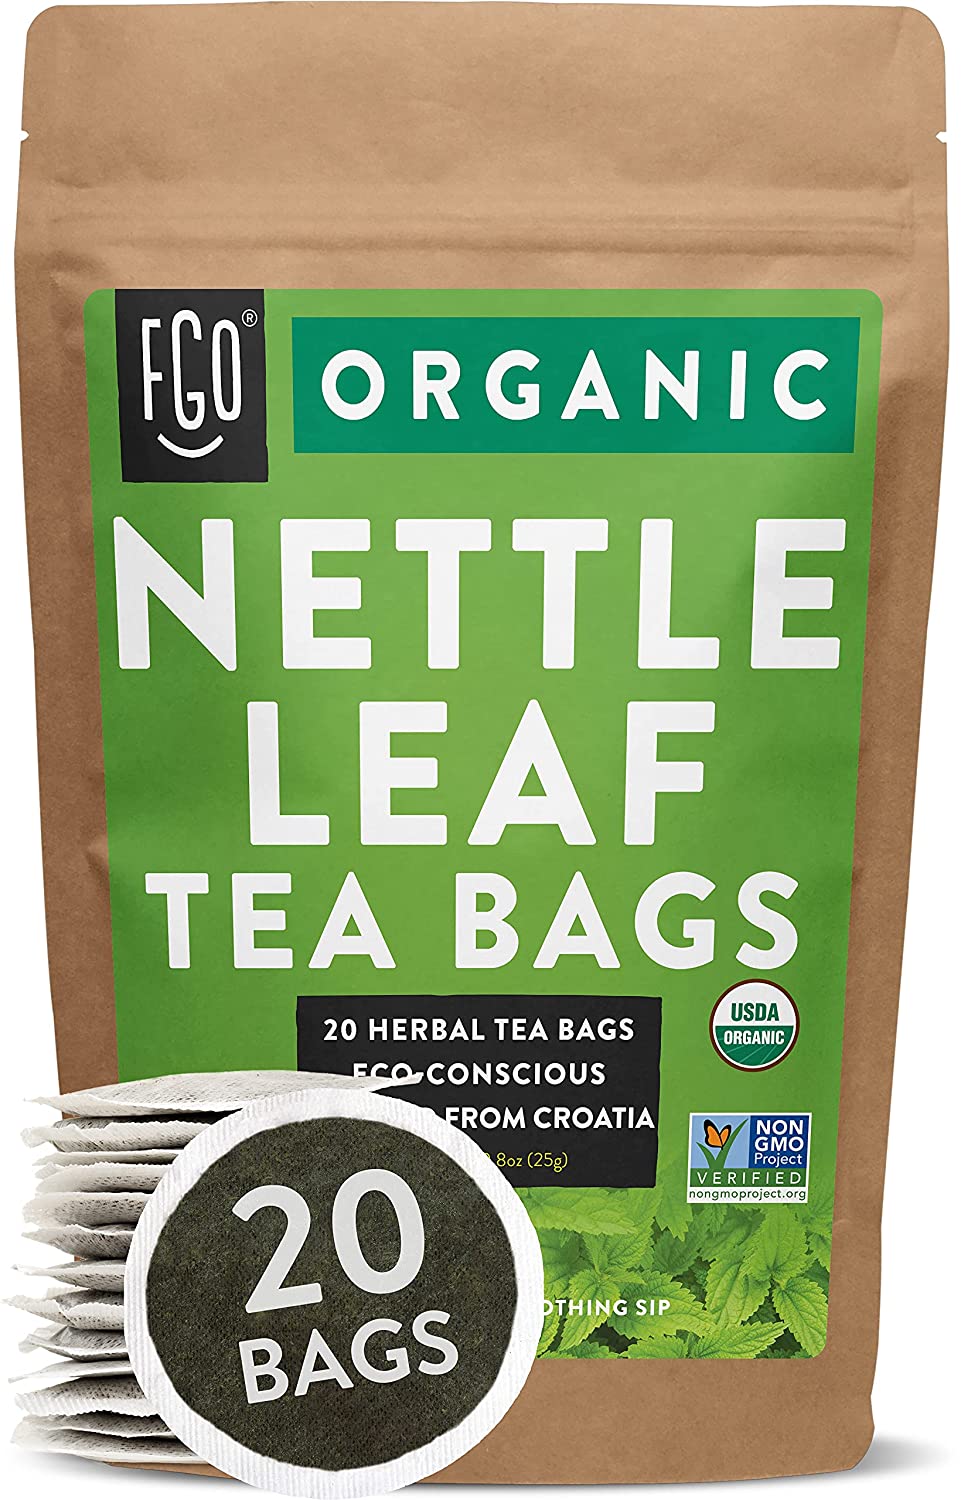 Style: Tea bags, Flavor Name: Nettle Leaf, Size: 20 Count (Pack of 1)